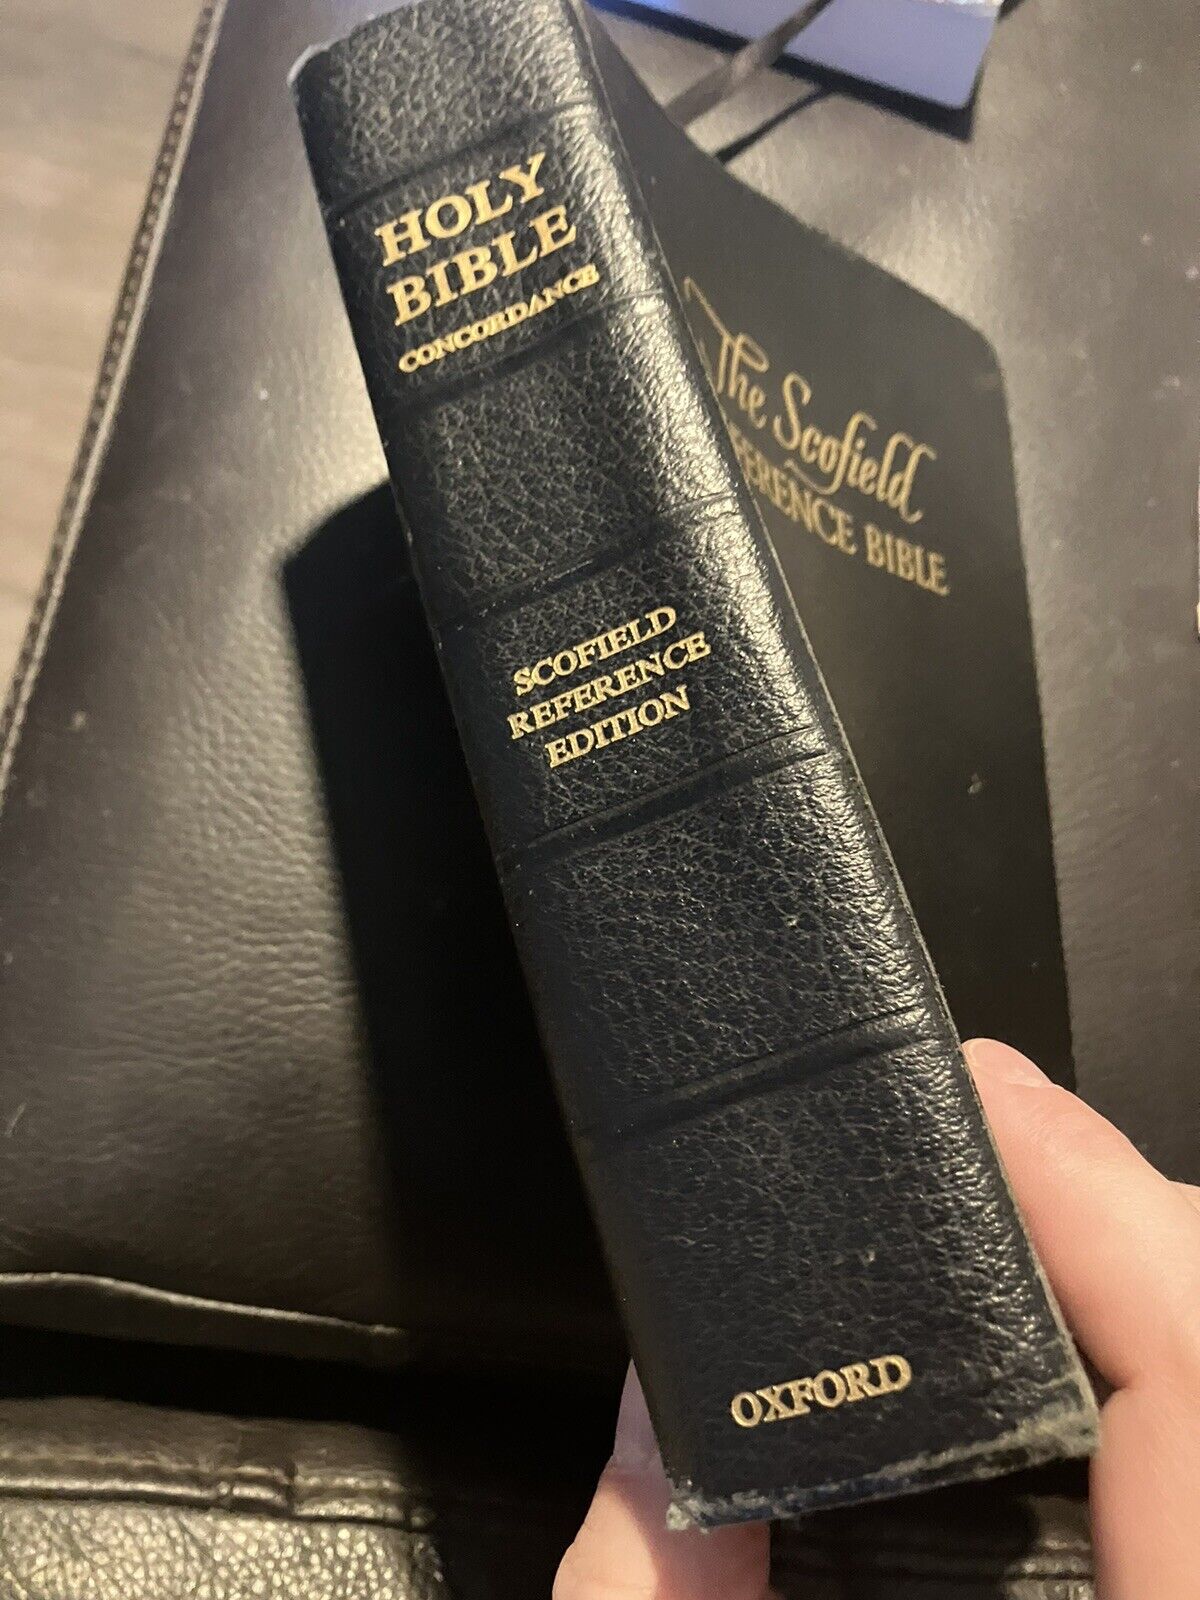 Scofield Reference Bible - King James Version - Oxford - 1945